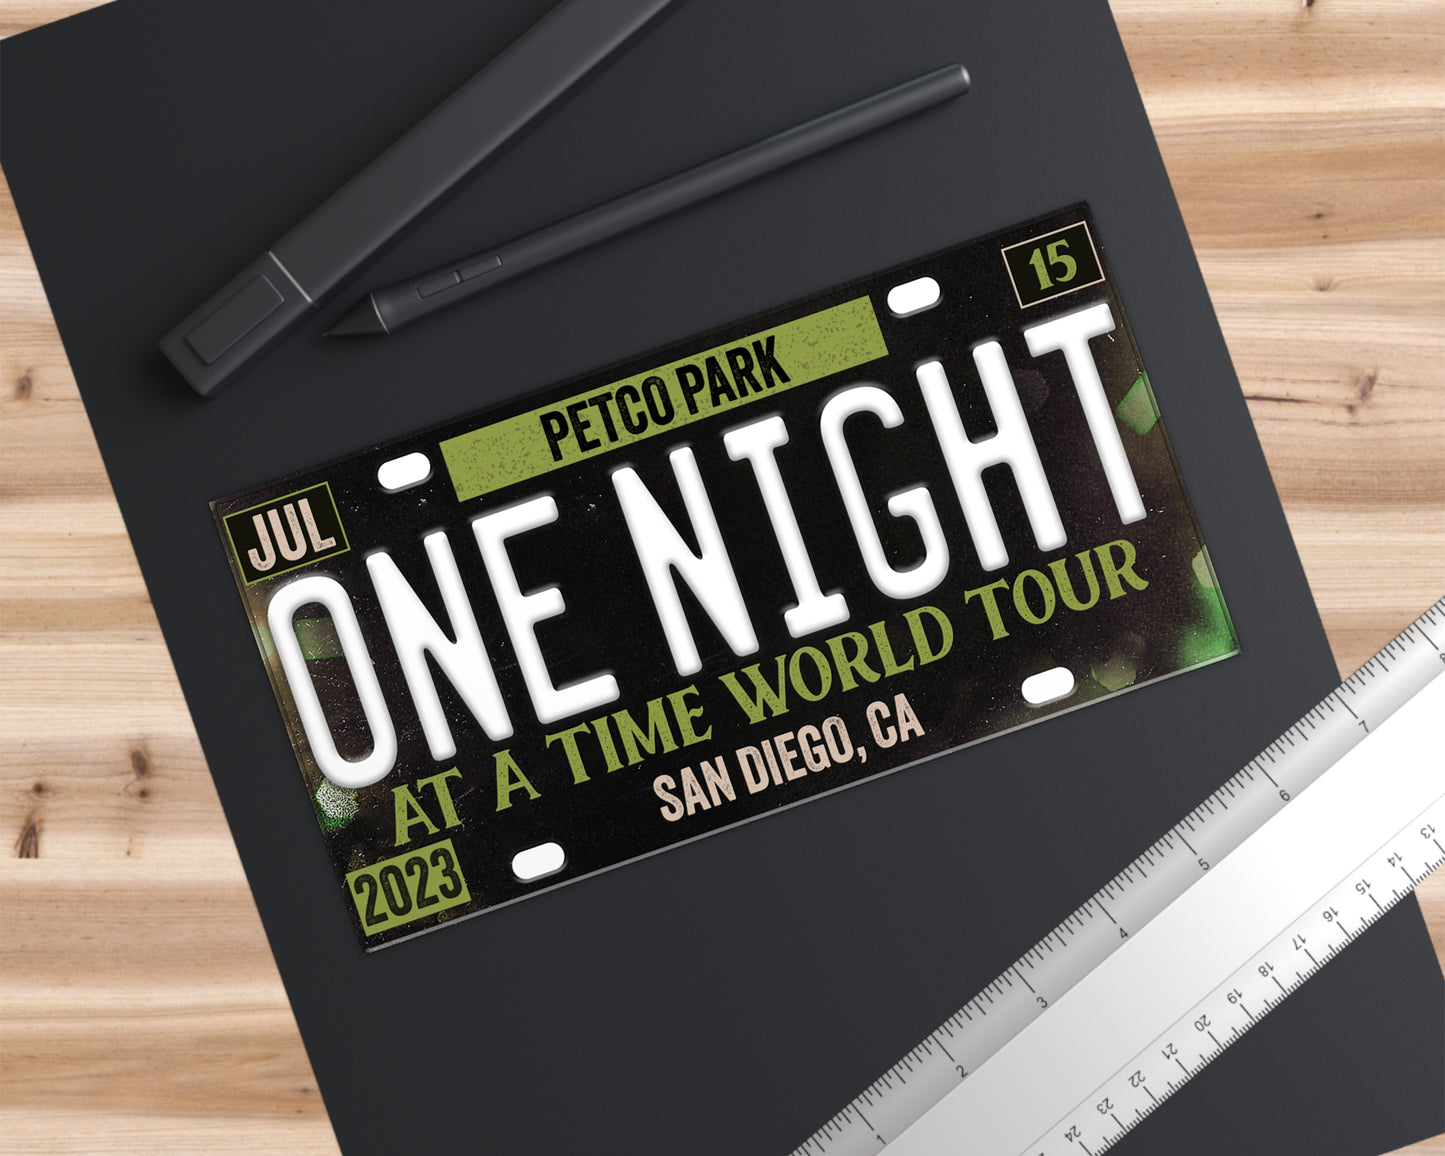 One Night at a Time World Tour bumper sticker